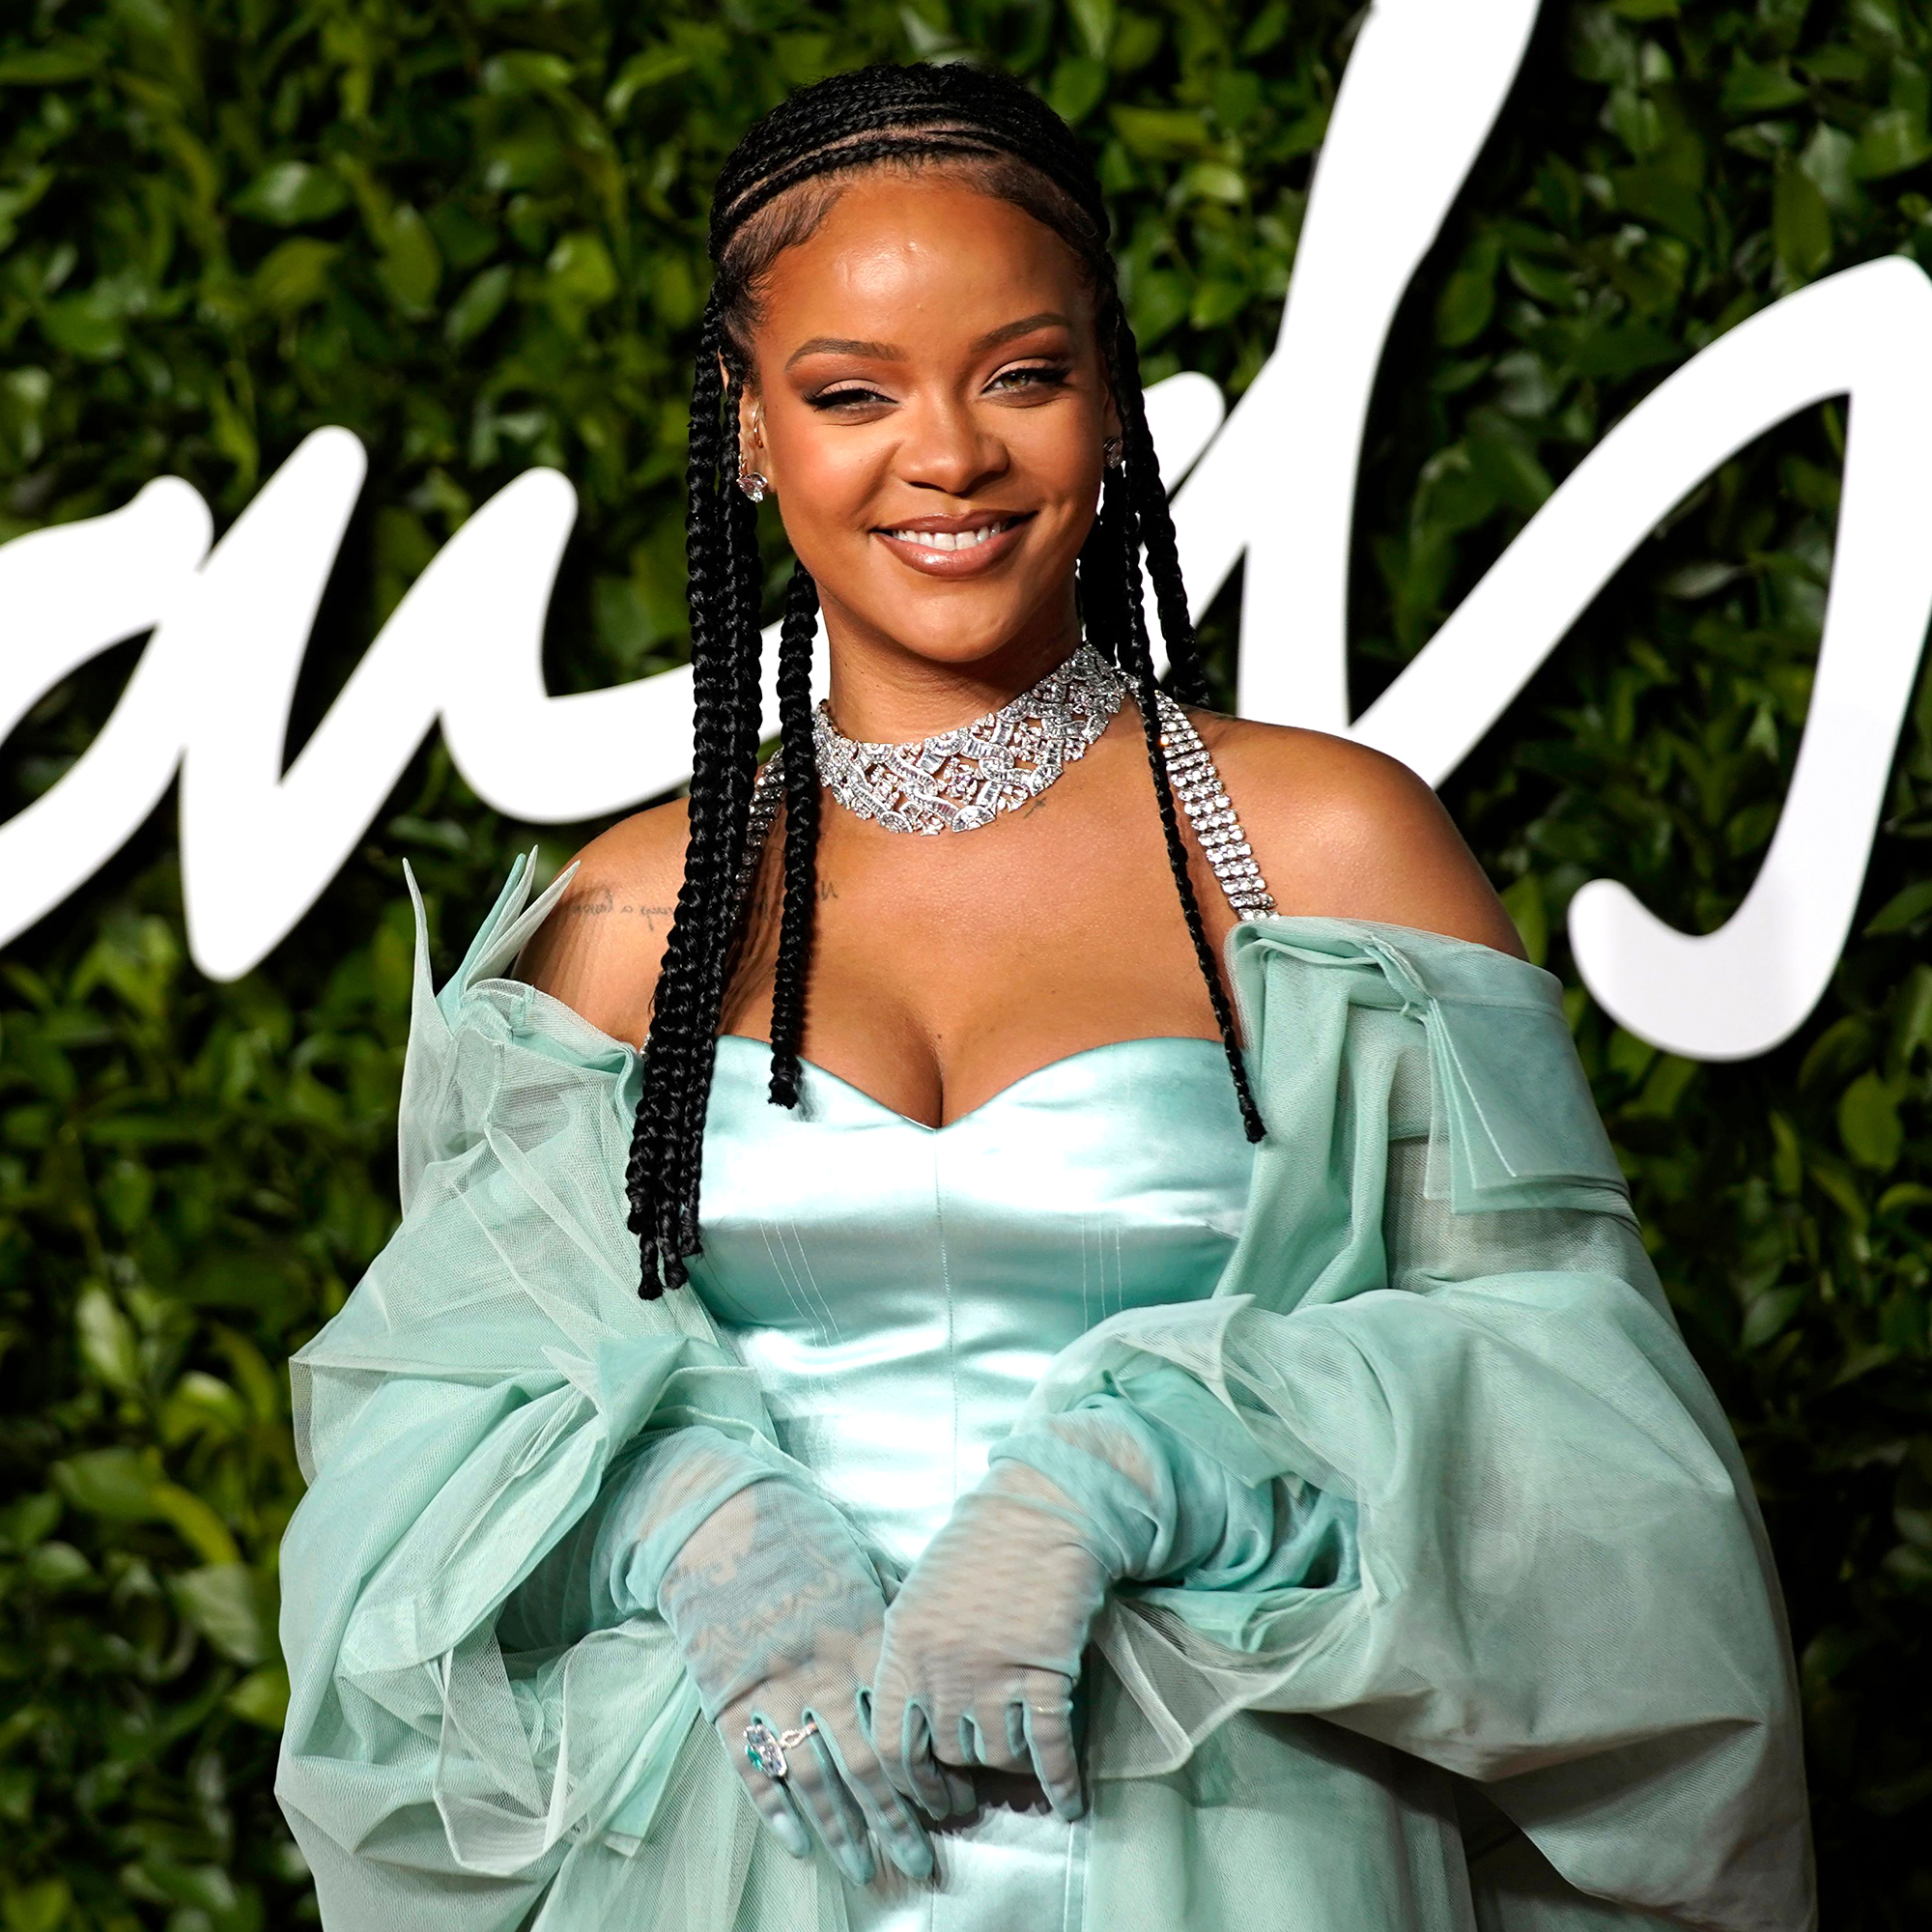 Will Rihanna perform during the Super Bowl Halftime Show?